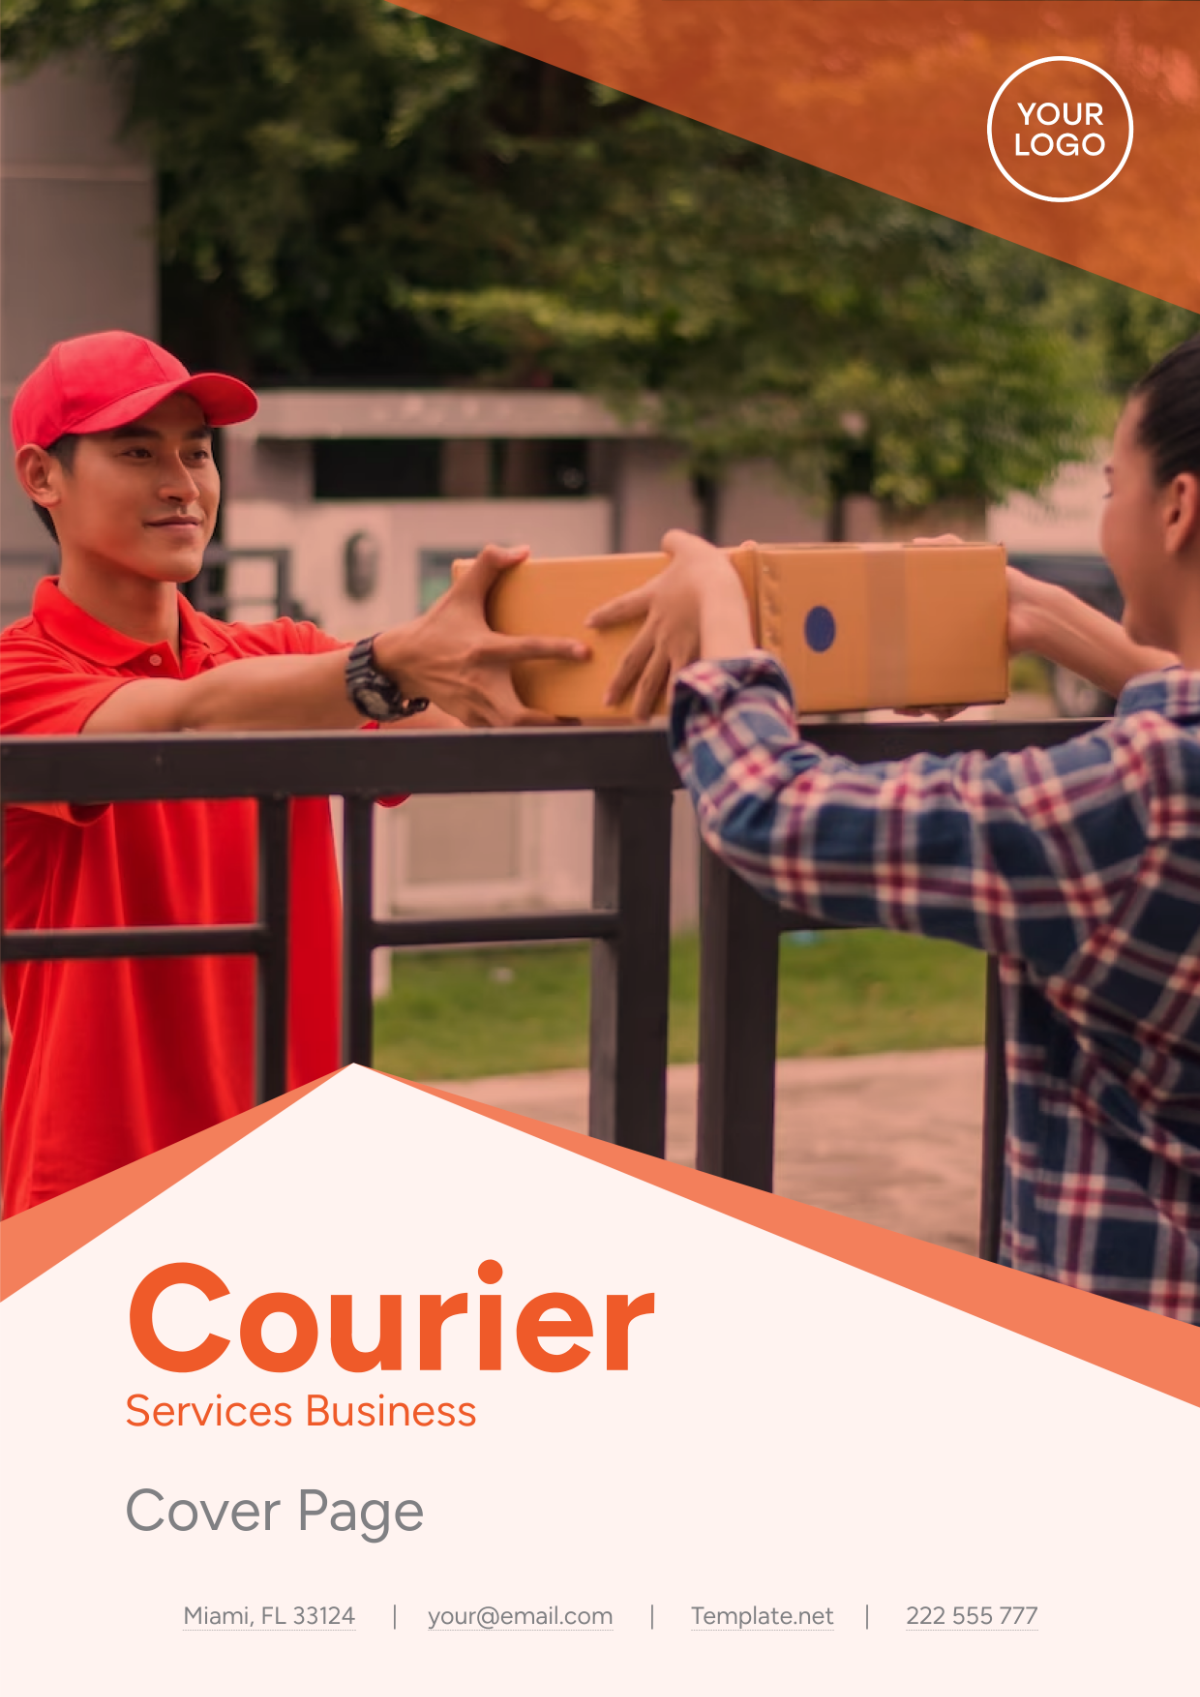 Courier Services Business Cover Page Template